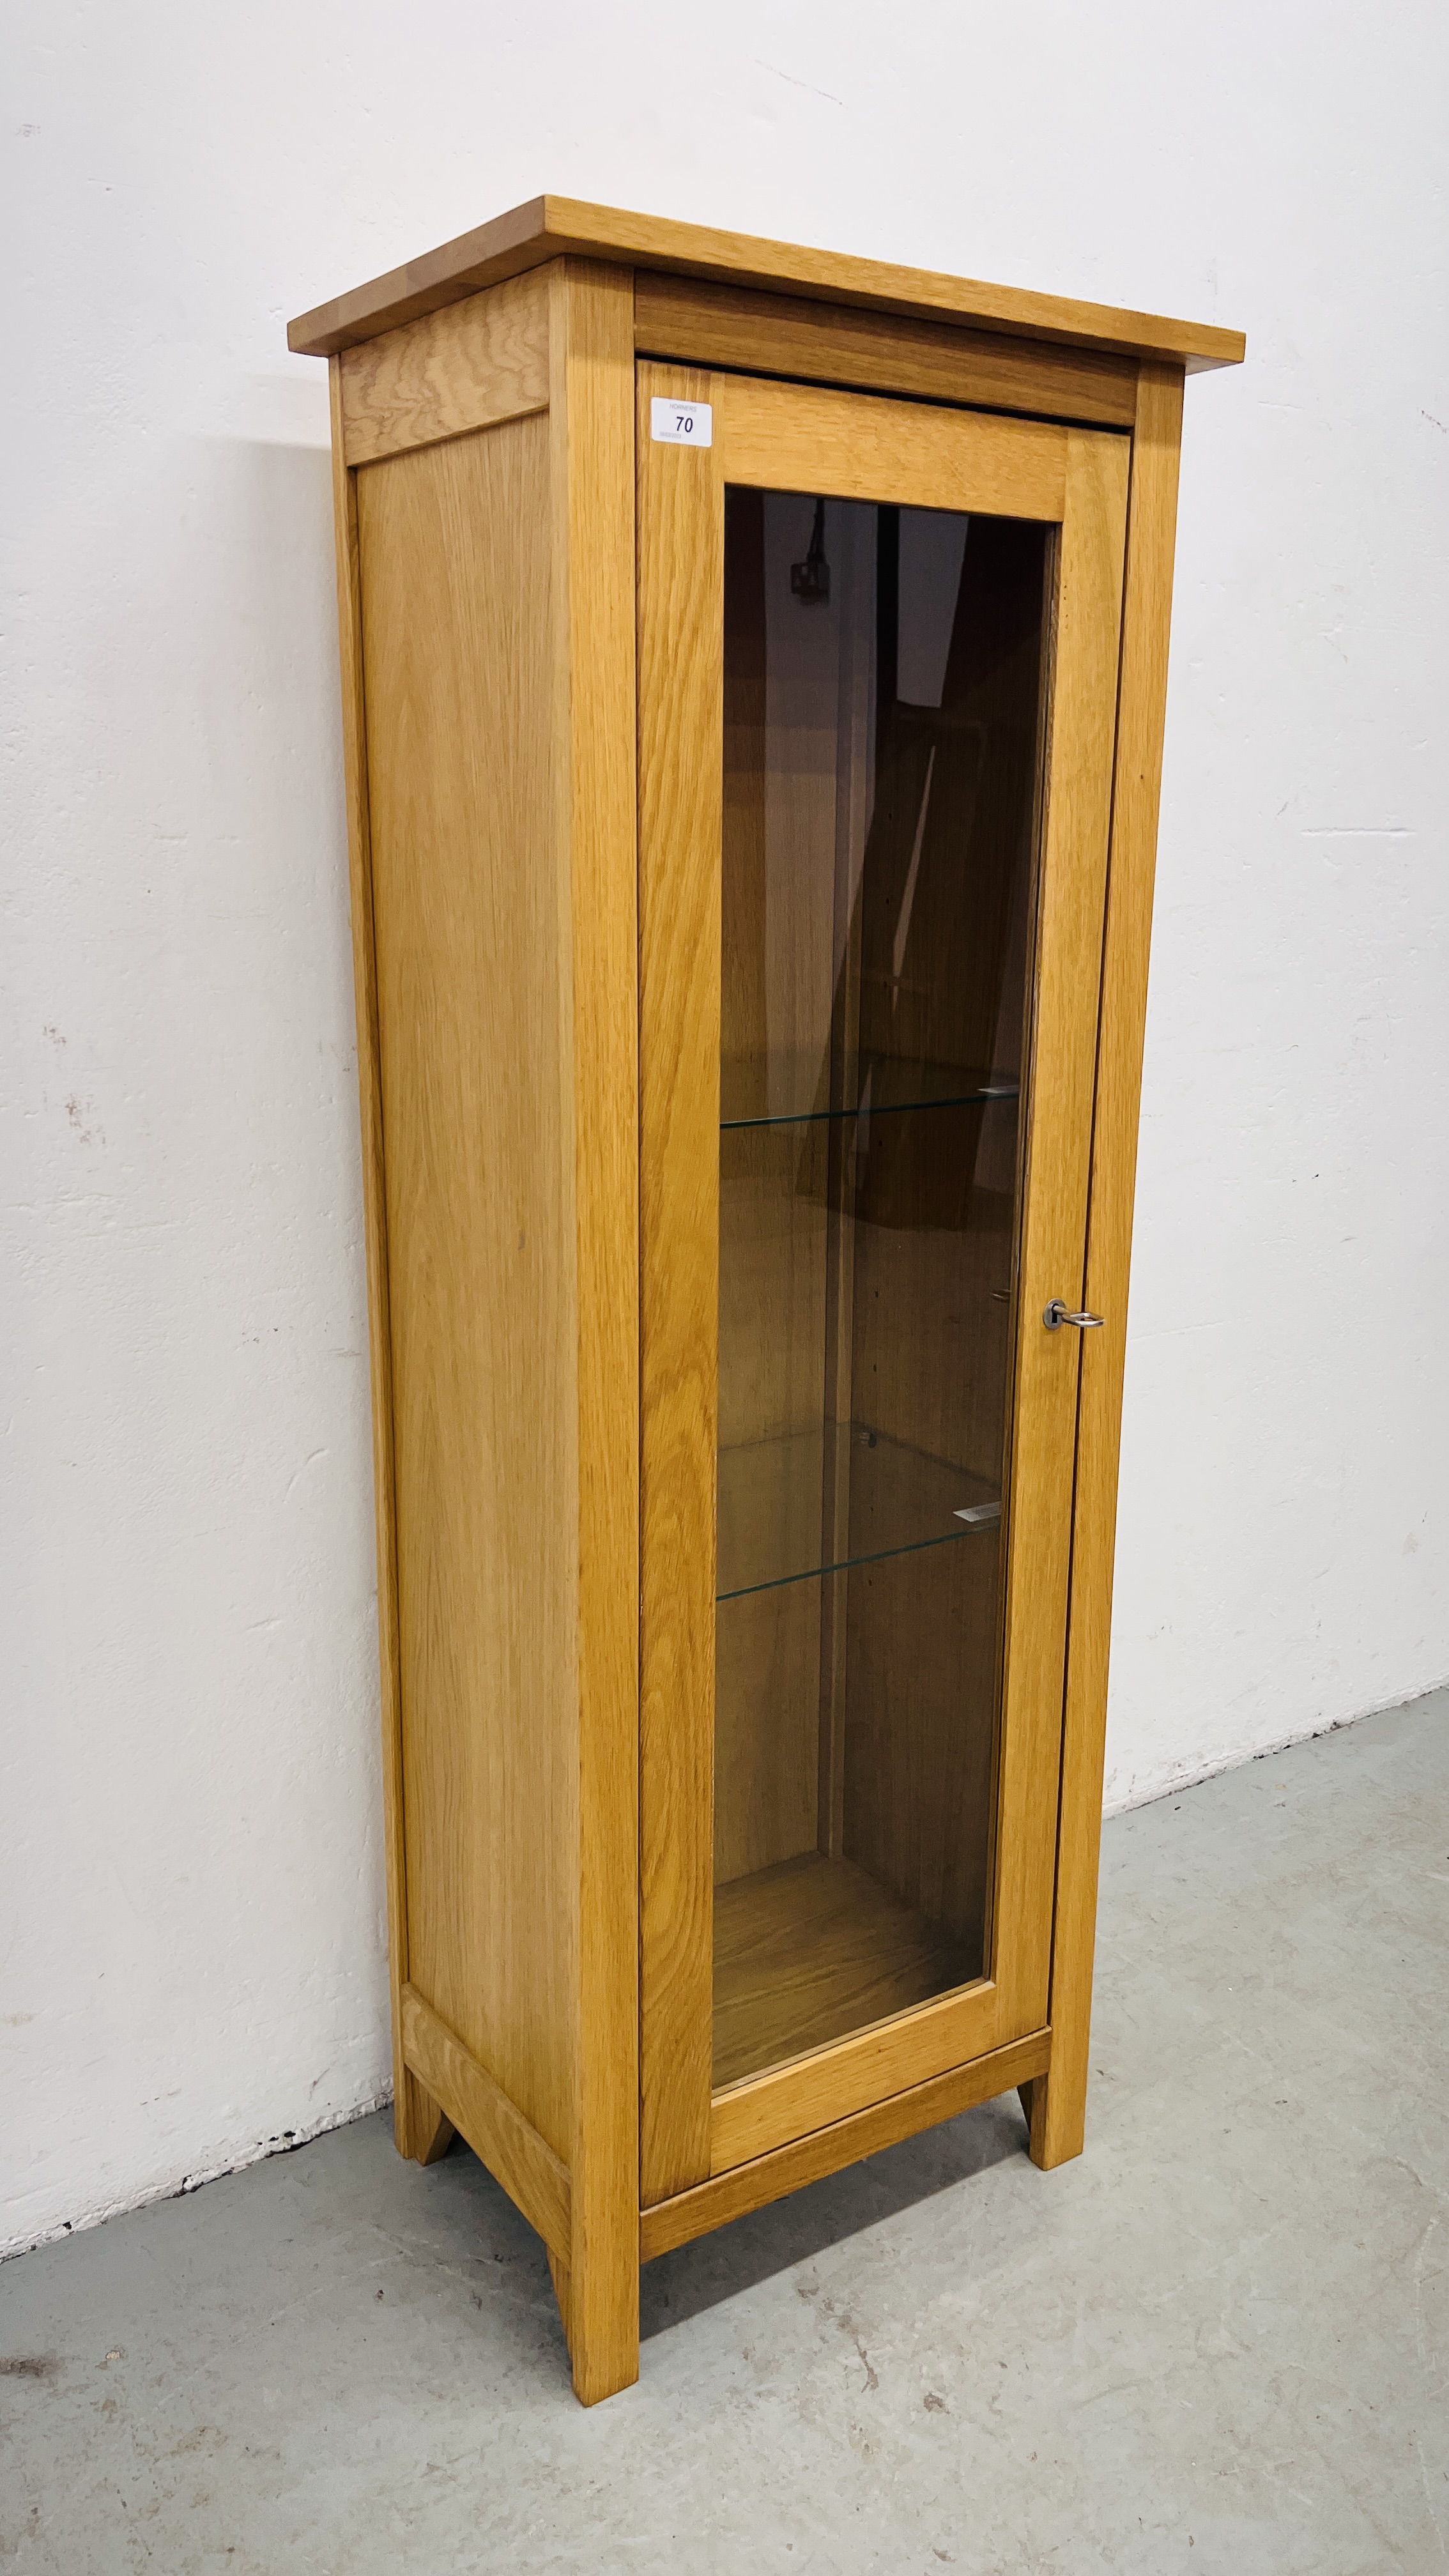 A SOLID LIGHT OAK MODERN TOWER DISPLAY CABINET WIDTH 51CM. HEIGHT 134CM. - Image 3 of 9